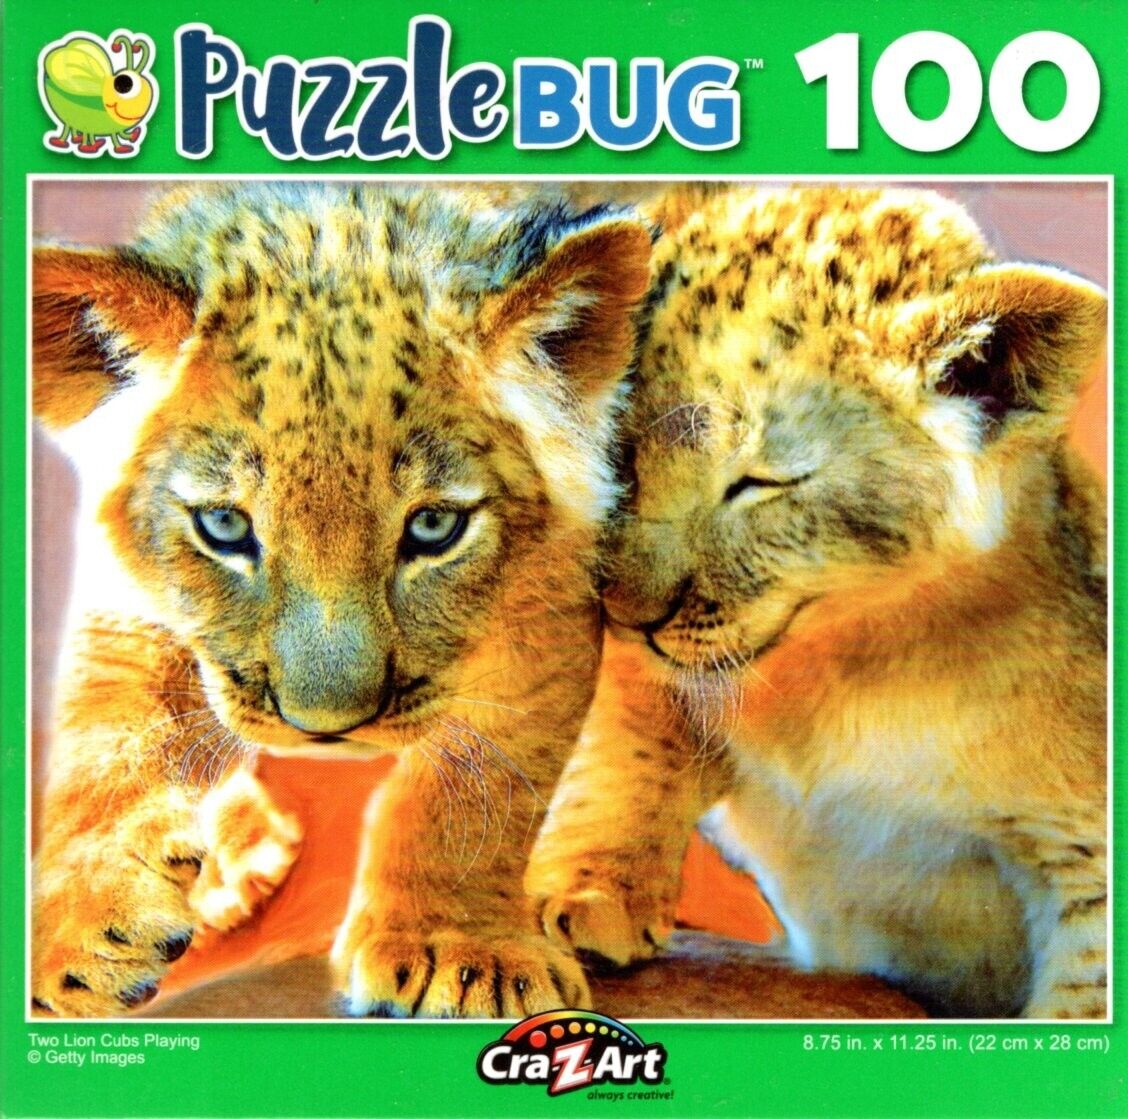 Two Lion Cubs Playing - 100 Pieces Jigsaw Puzzle